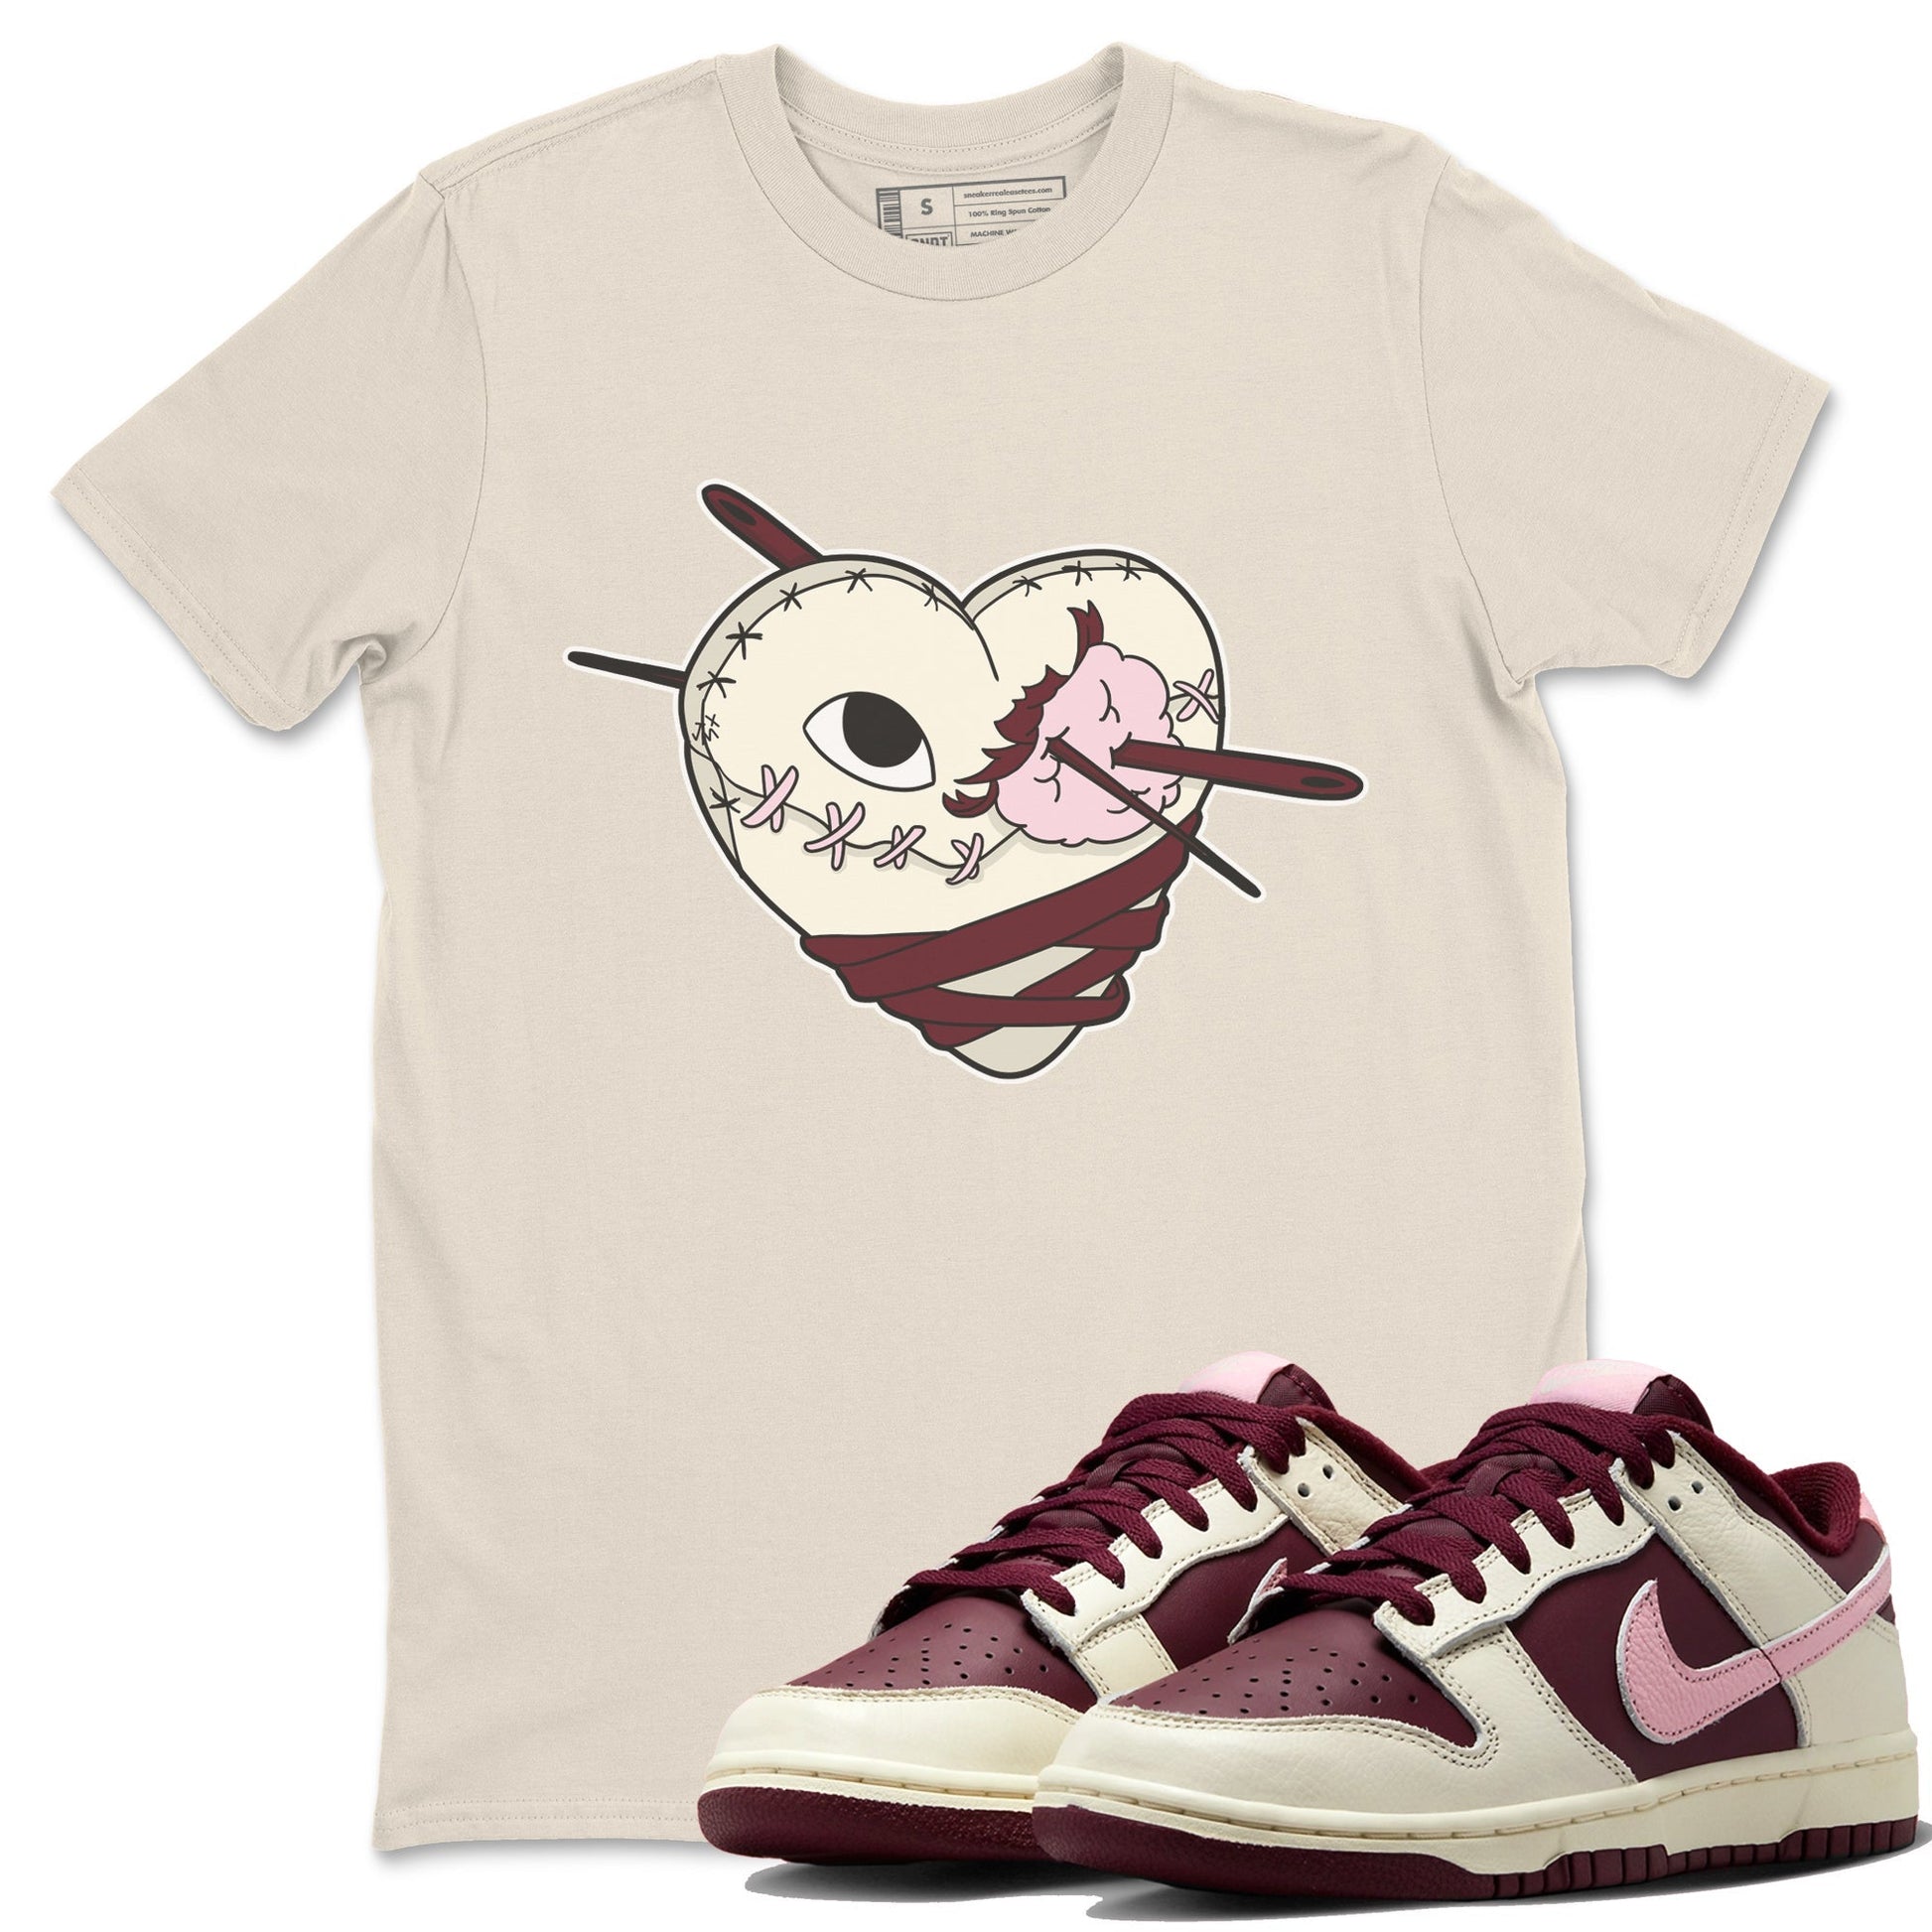 Dunk Valentines Day Sneaker Match Tees Hurt Heart Sneaker Tees Nike Dunk Valentine's Day Sneaker SNRT Sneaker Tees Unisex Shirts